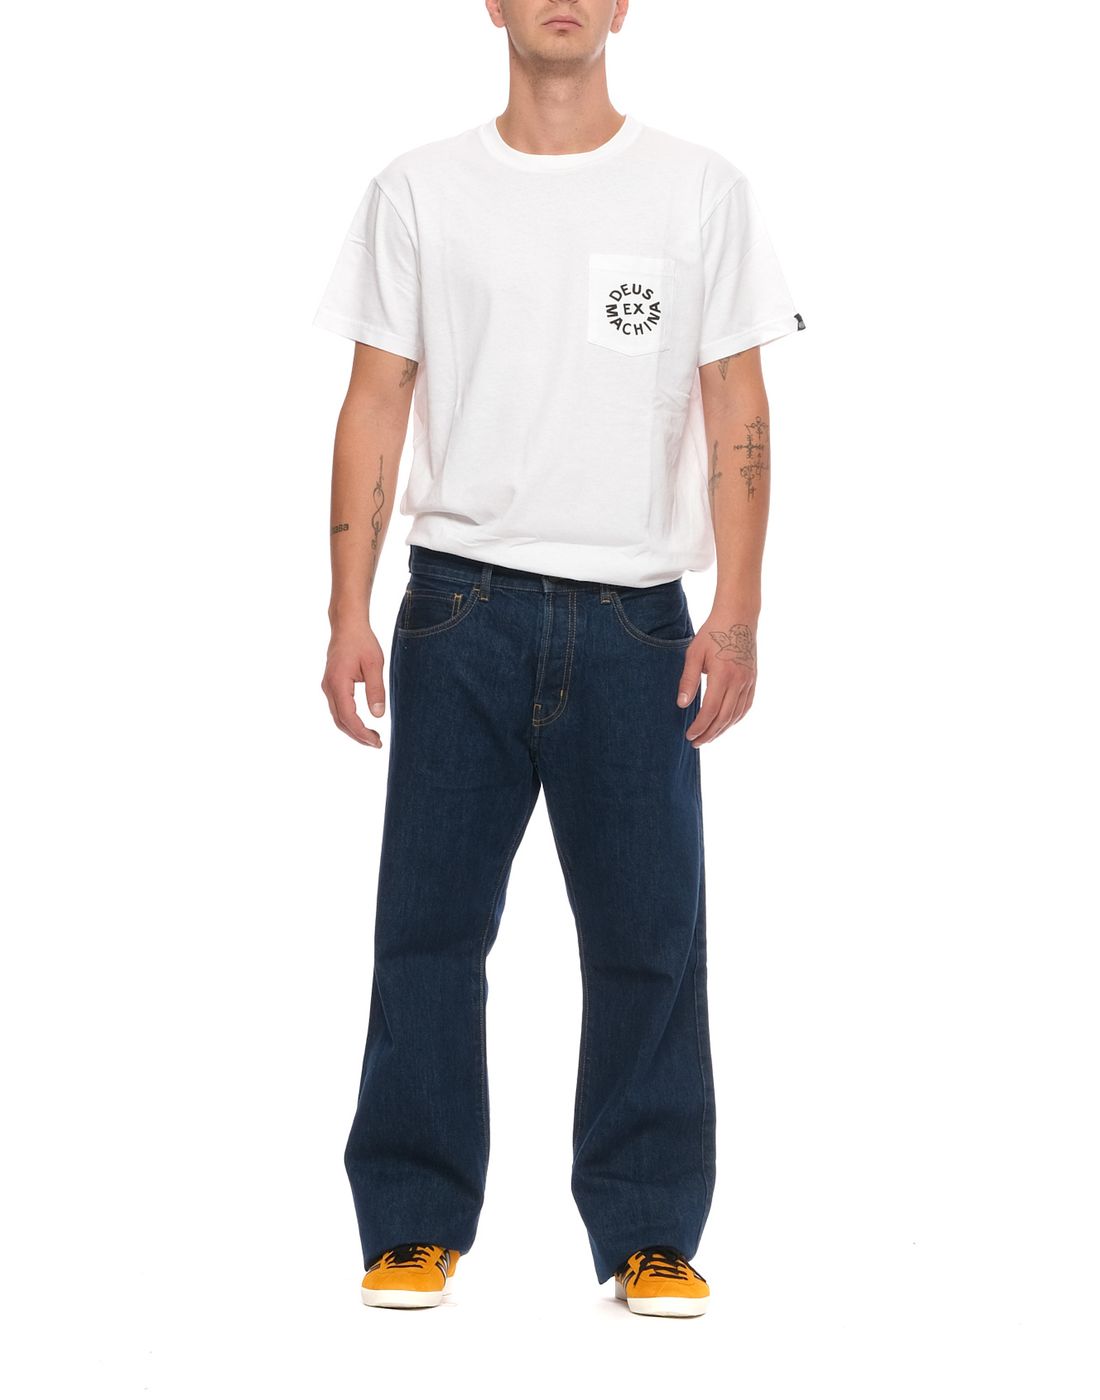 Jeans for man TYPE 18 RELAXED RINSE PeppinoPeppino